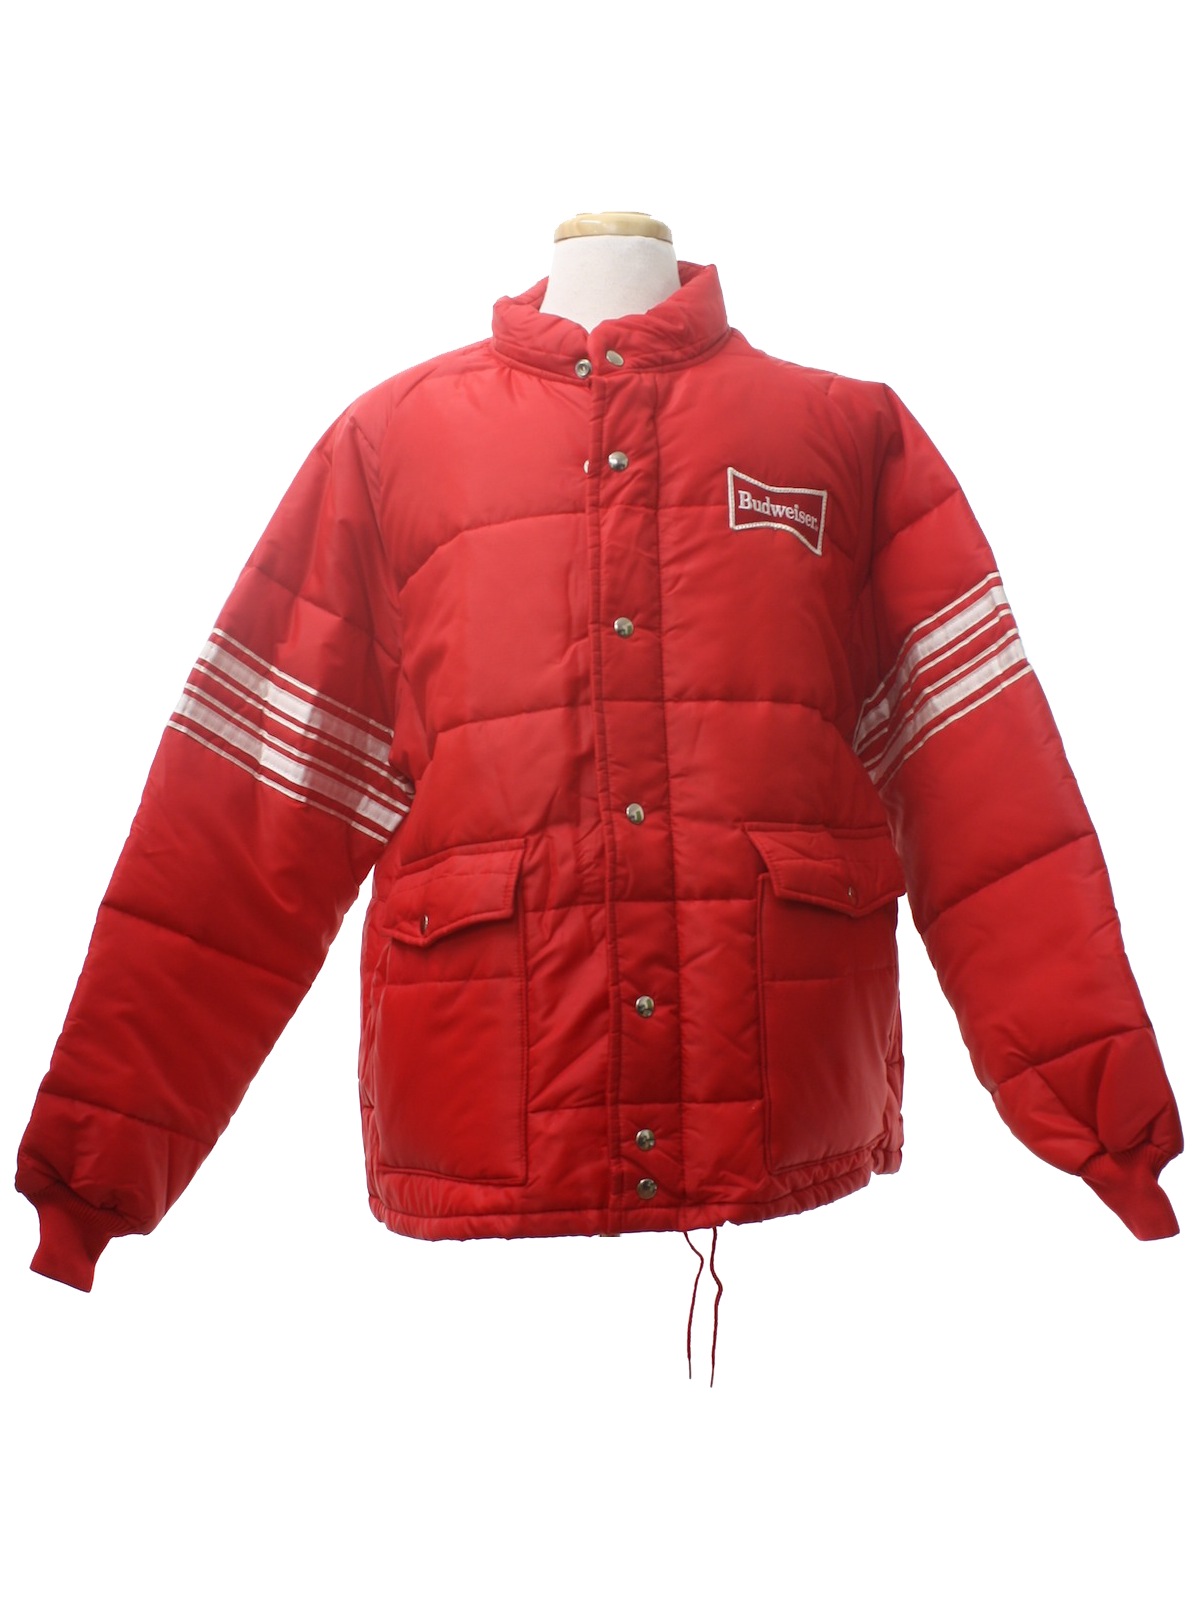 Retro 1980's Jacket (Swingster) : 80s -Swingster- Mens red quilted ...